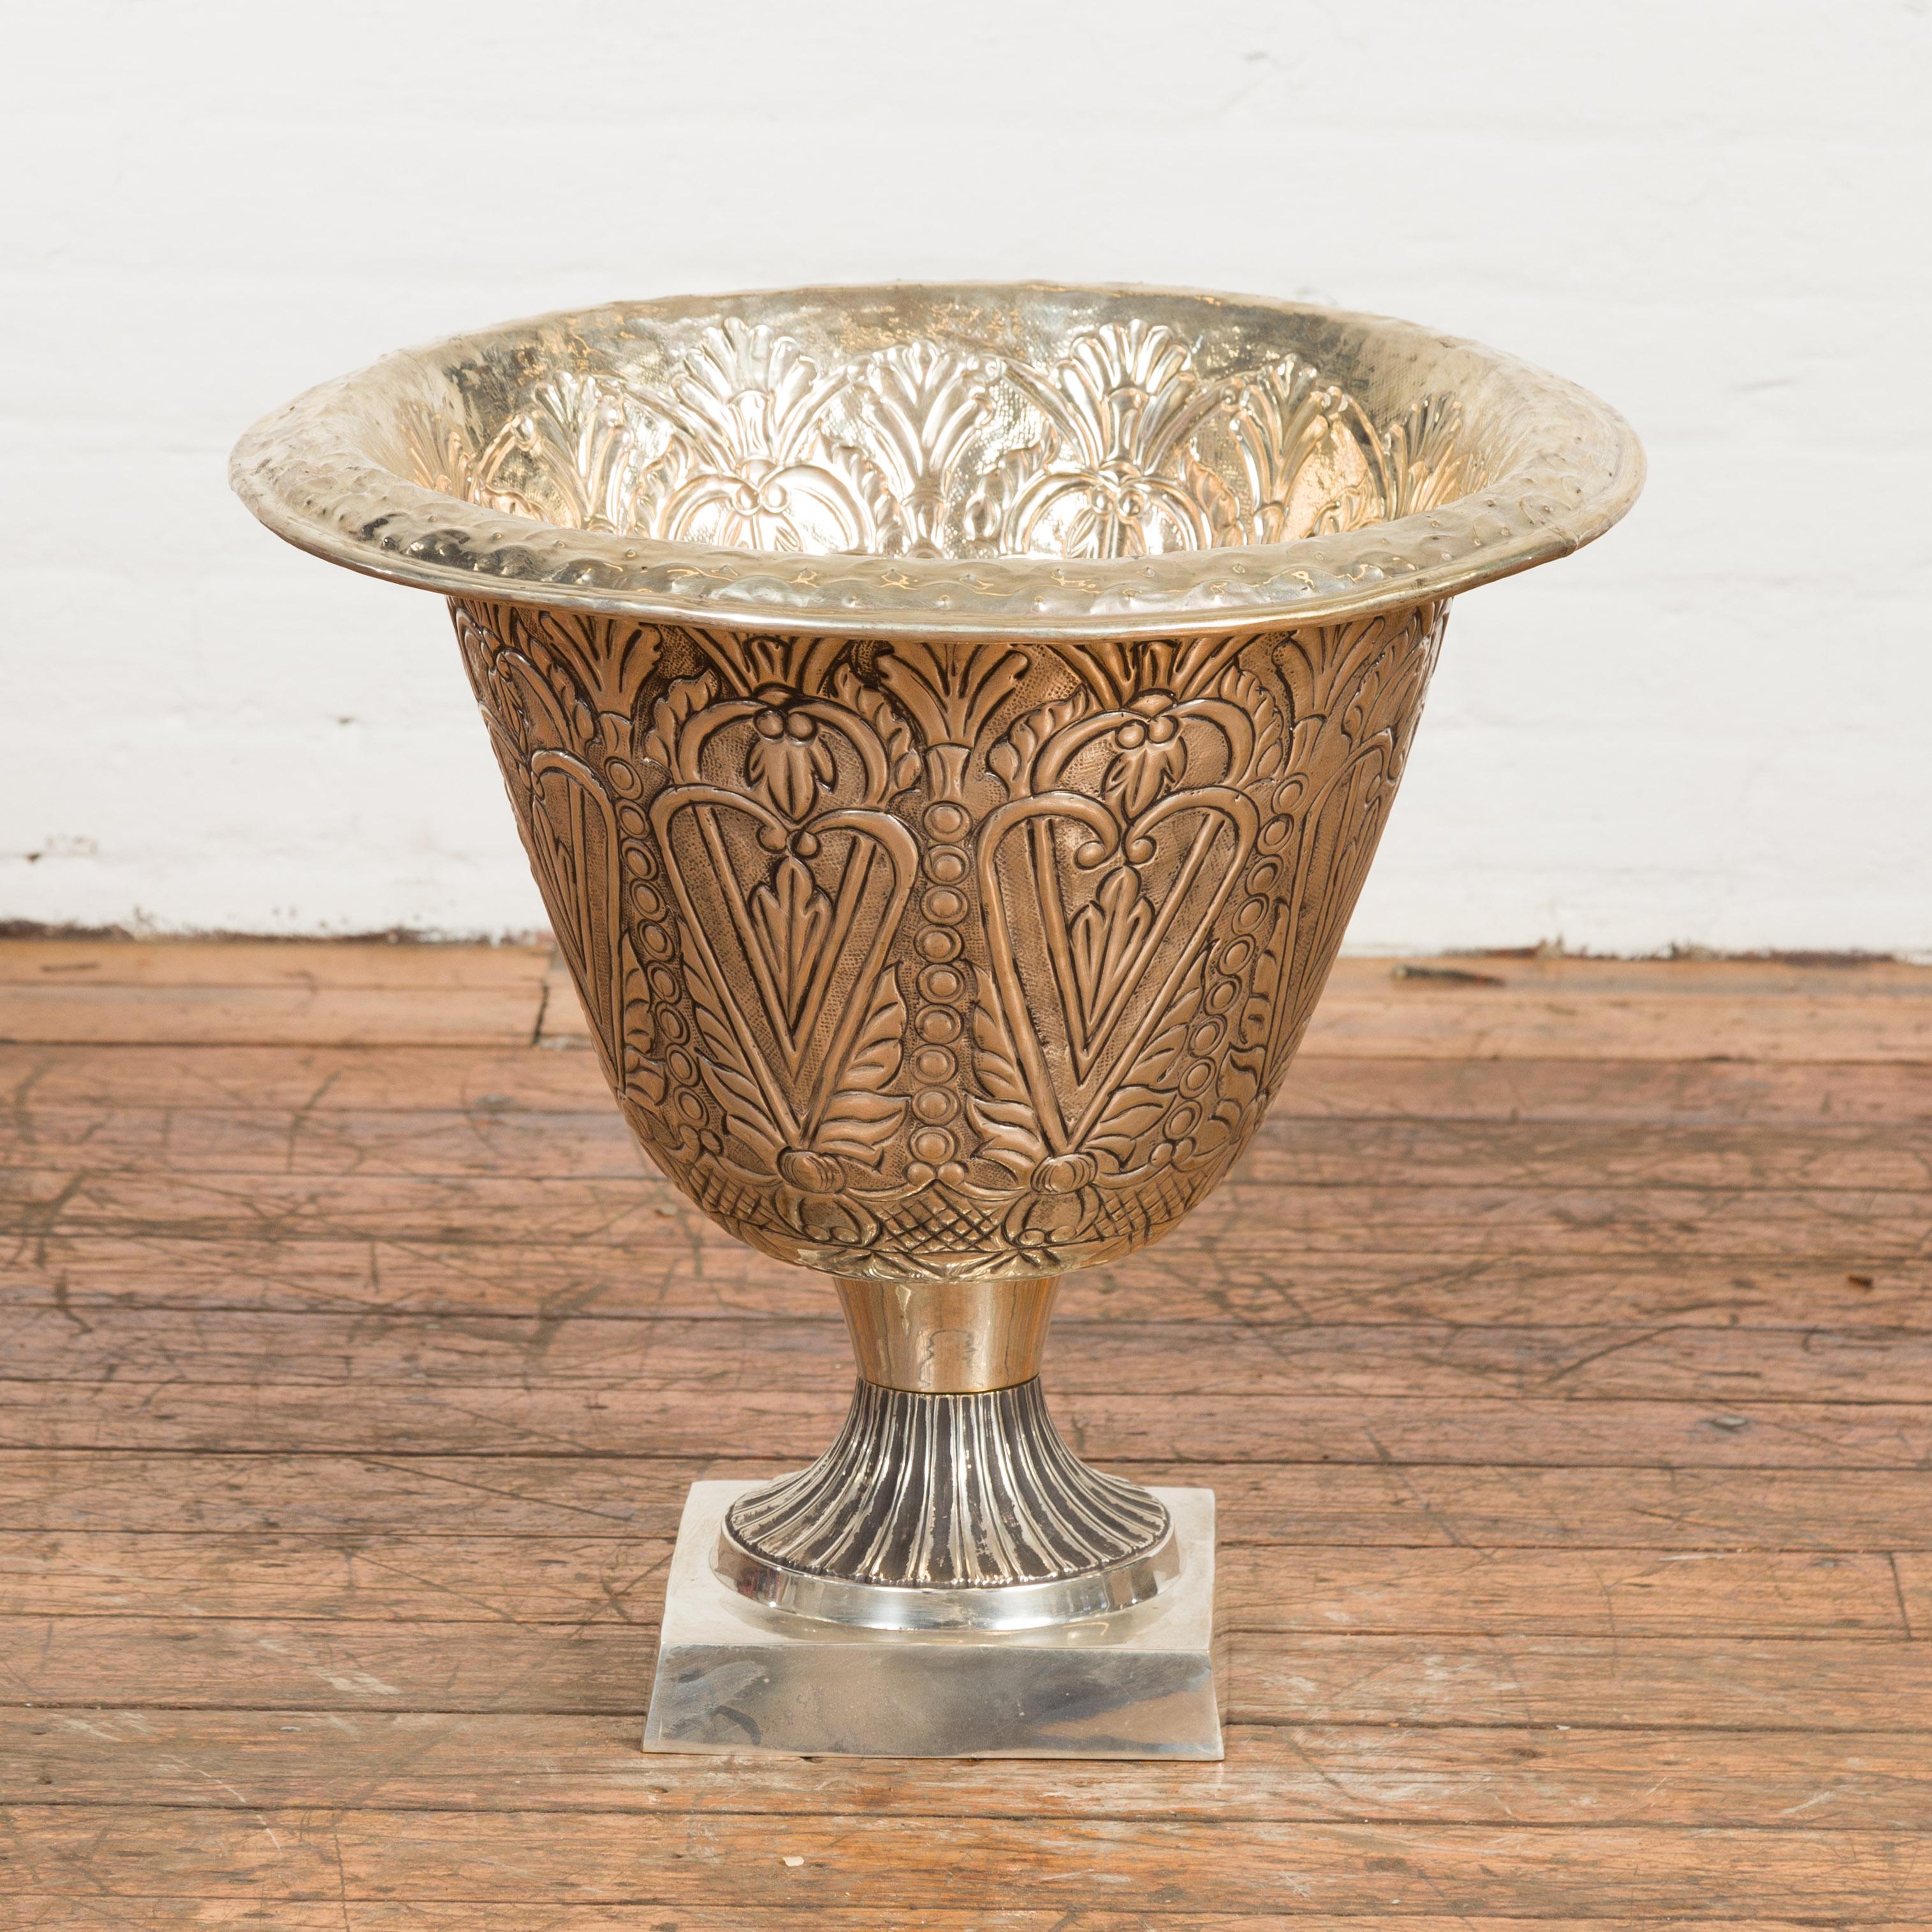 A vintage Indian silver over brass urn from the Mid-20th Century, with rich décor depicting stylized heart motifs and foliage on square base. Created in India during the Midcentury period, this silver over brass urn attracts our attention with its